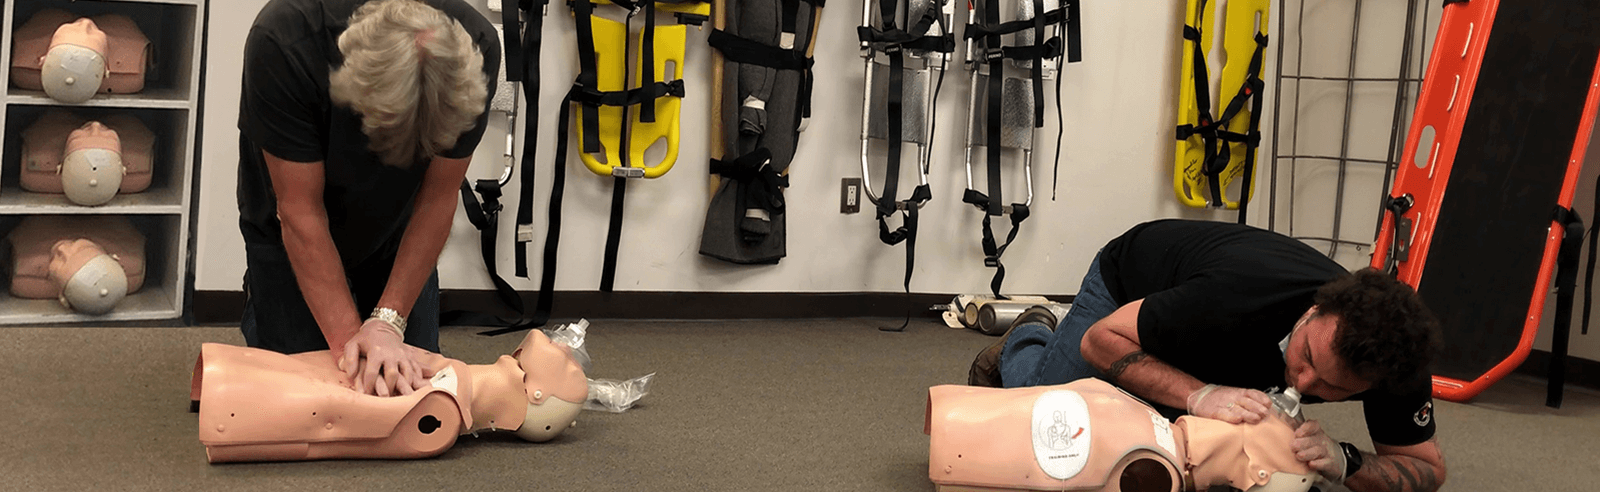 Occupational First Aid Level 3 Course Vancouver BC (Pro Renewal) - Trauma  Tech